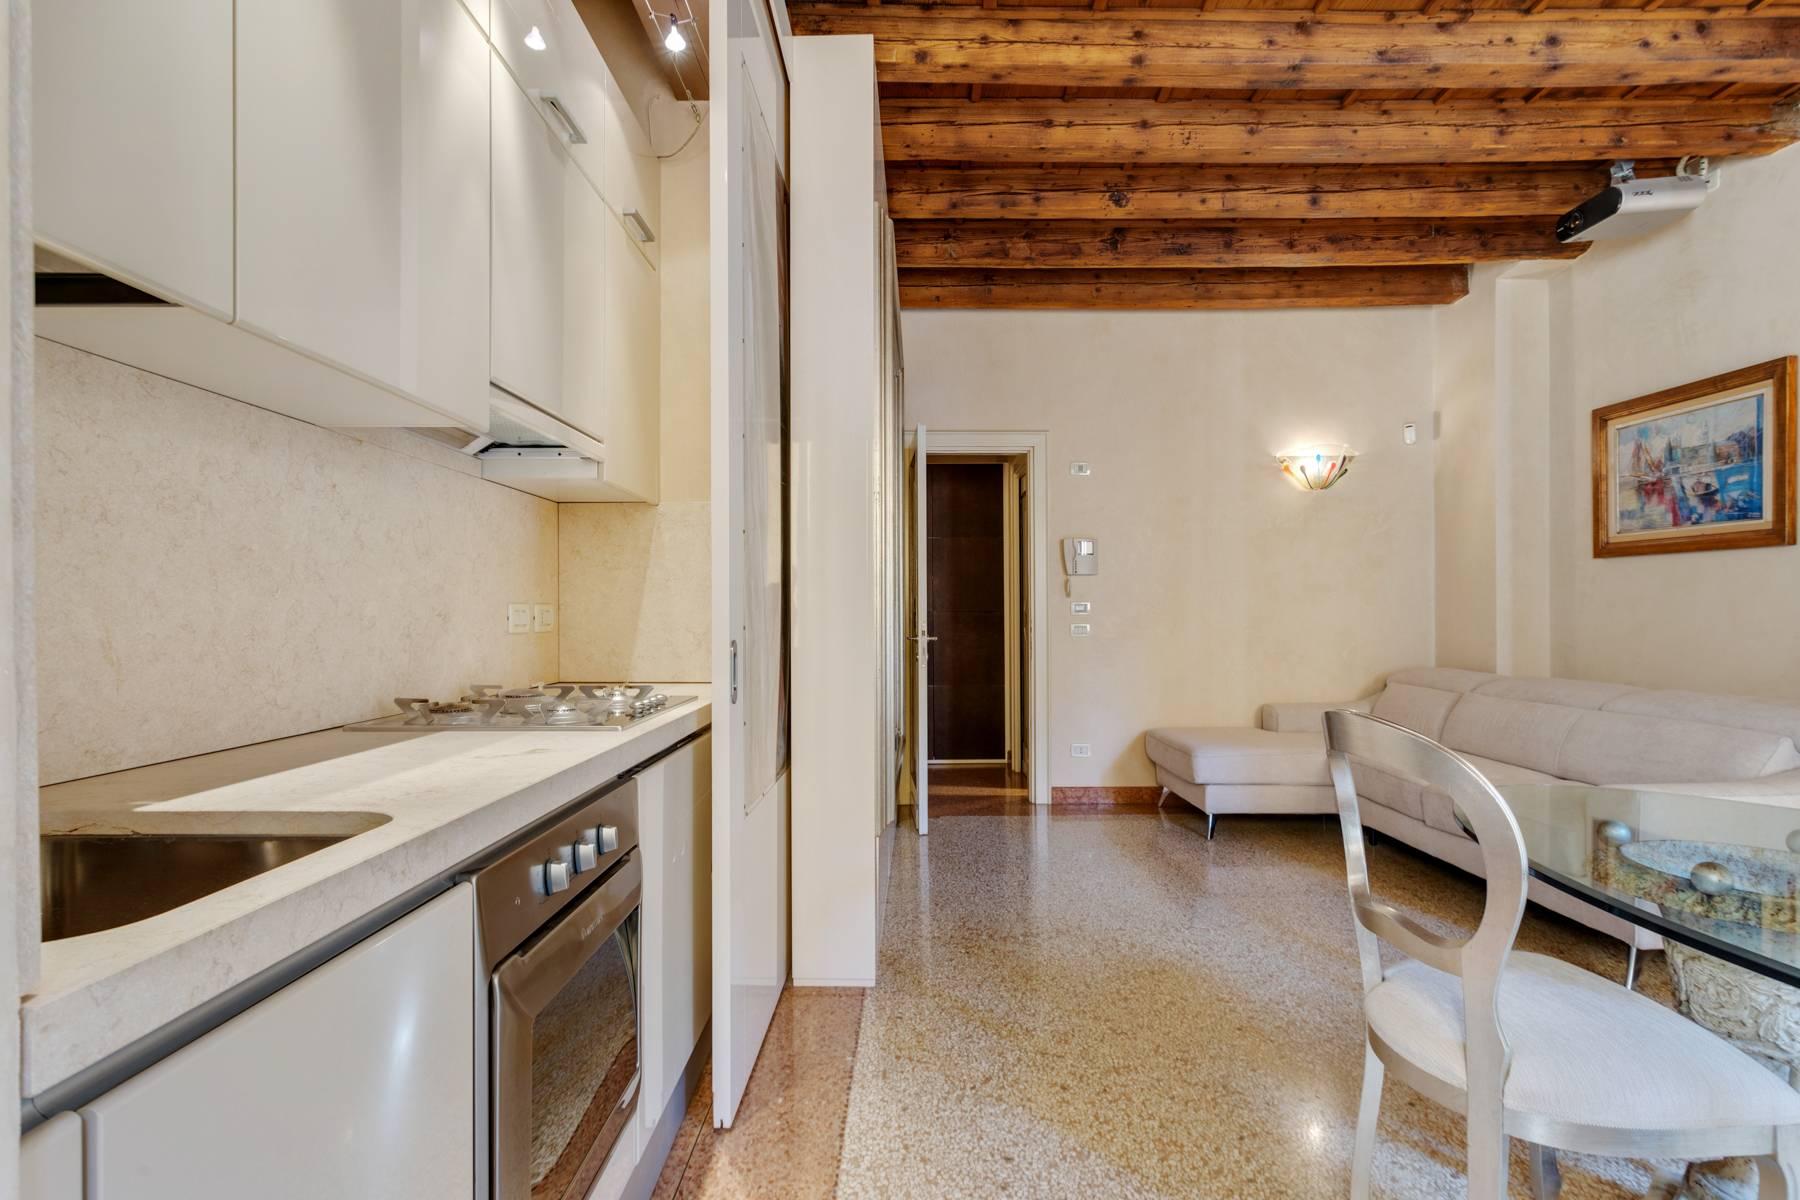 Exquisite apartment just few steps away from Piazza delle Erbe - 6